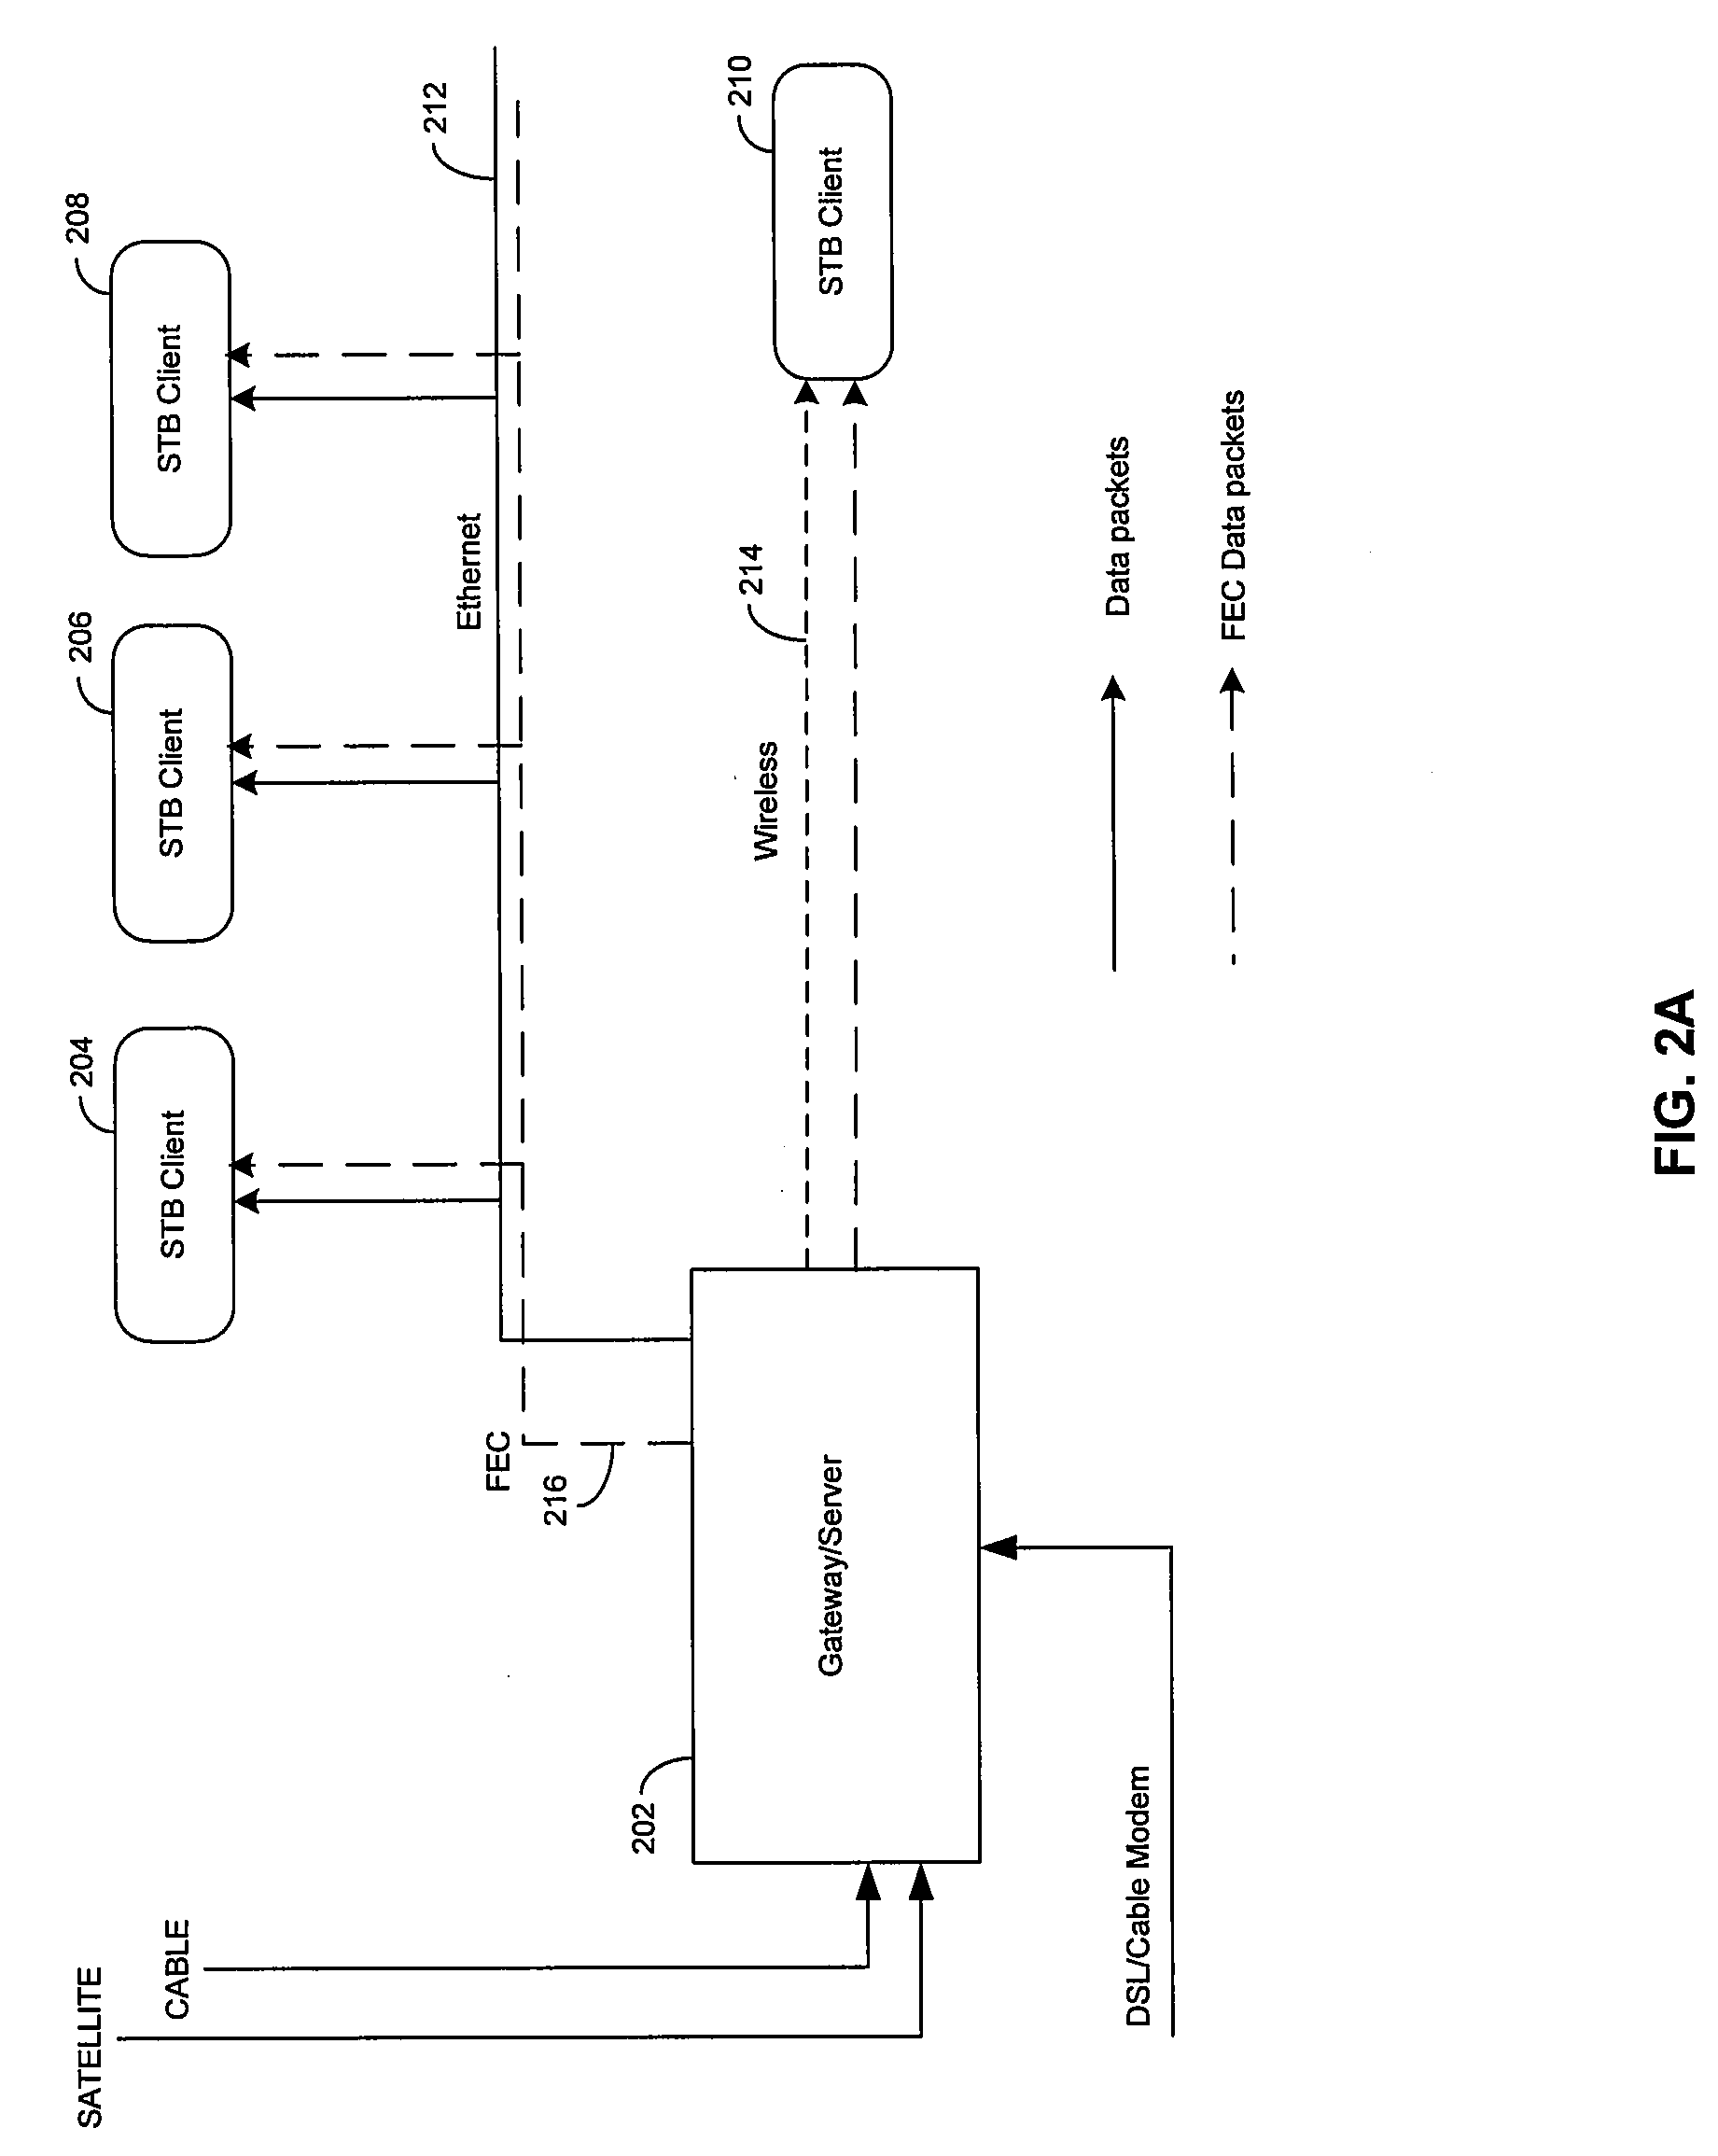 Method and System for Dynamically Adjusting Forward Error Correction (FEC) Rate to Adapt for Time Varying Network Impairments in Video Streaming Applications Over IP Networks